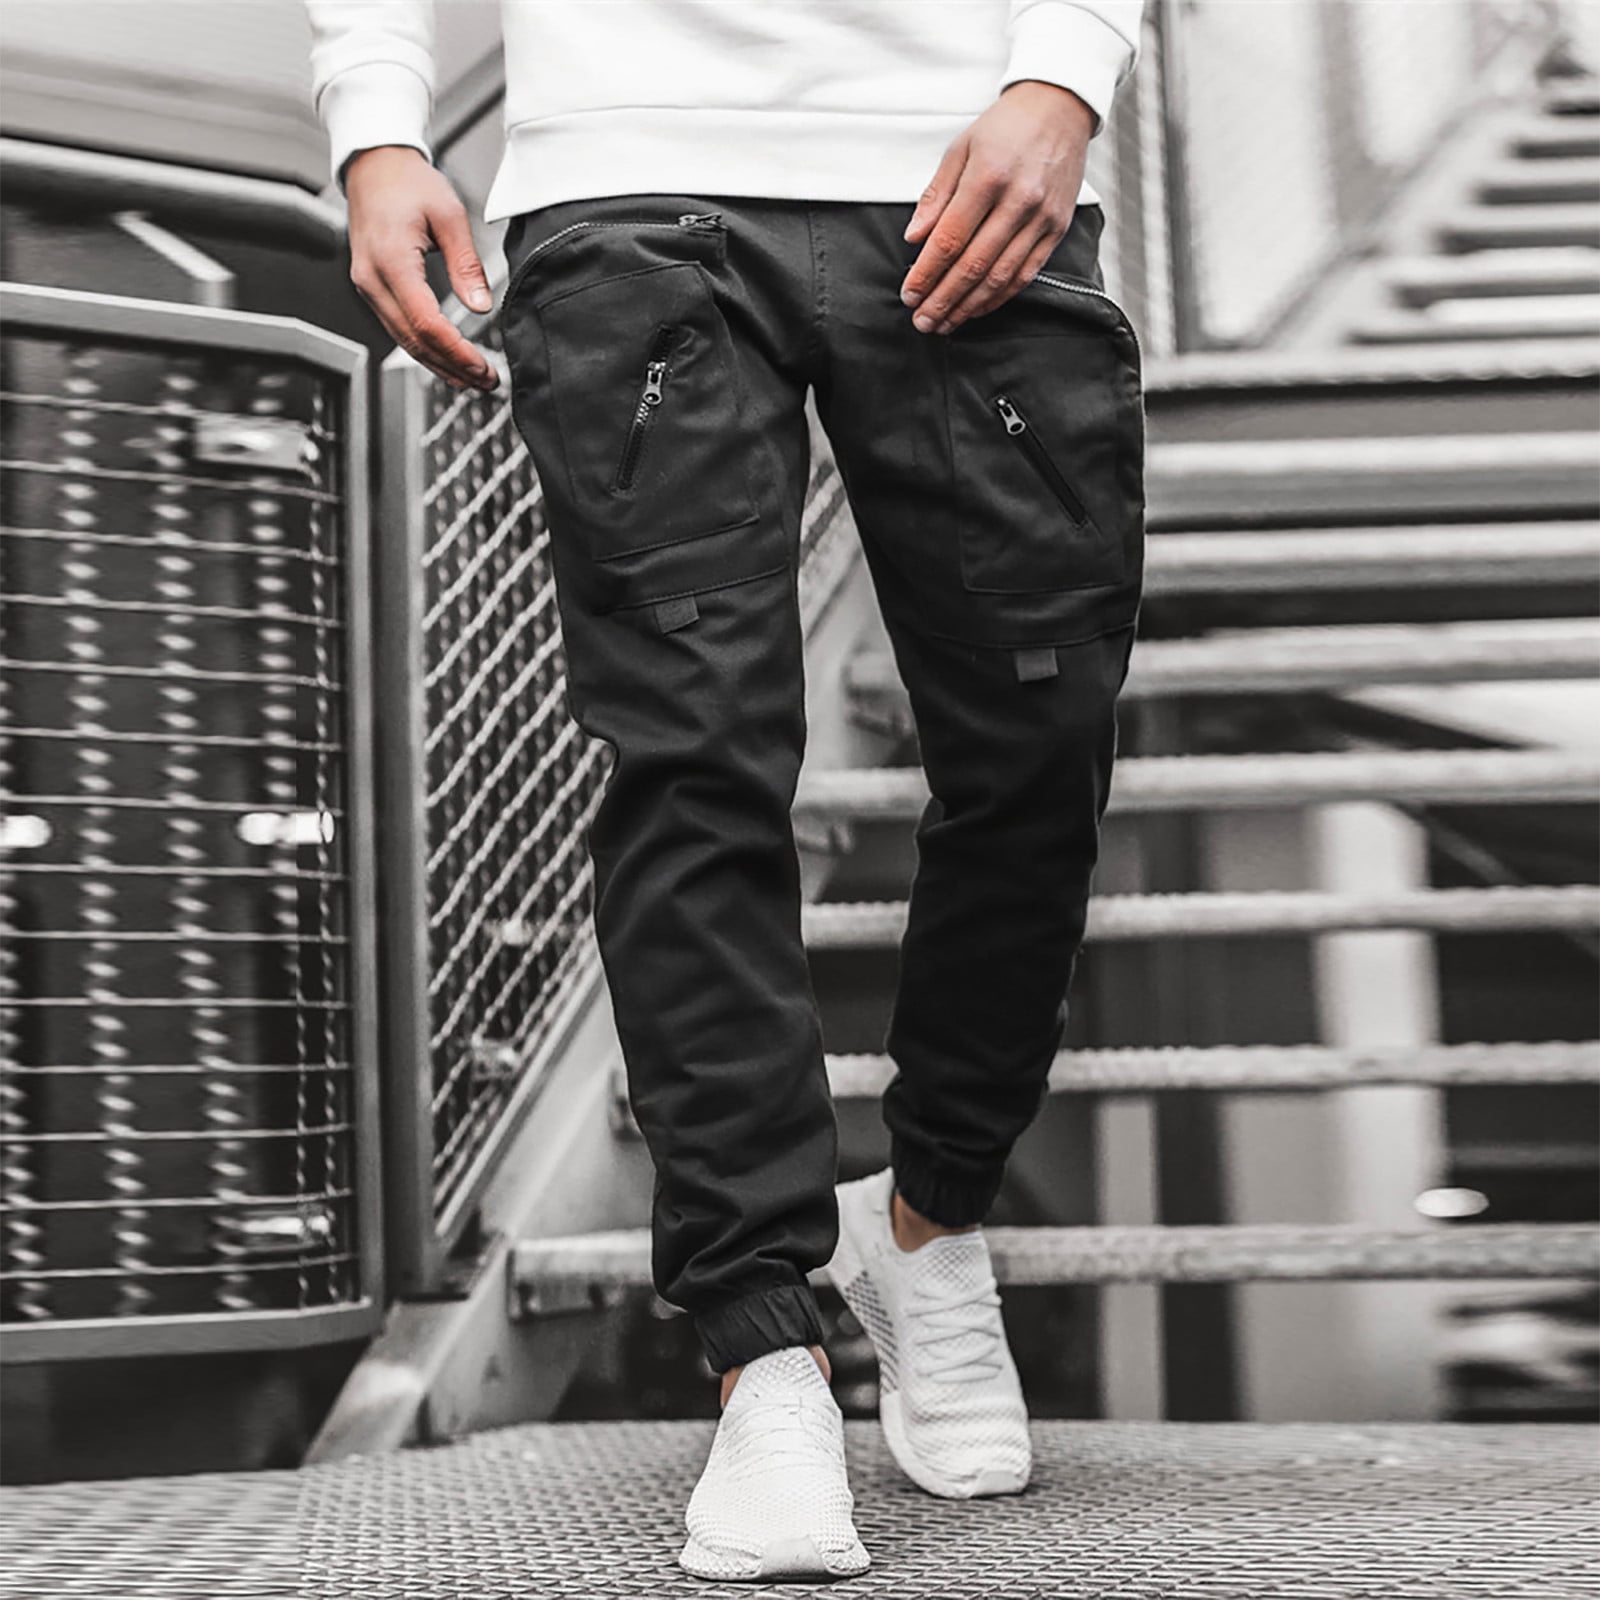 Spring Summer Thin Men Fashions Solid Color Casual Pants Man Slim Fit  Elastic Ankle-Length High Quality Formal Trousers Male